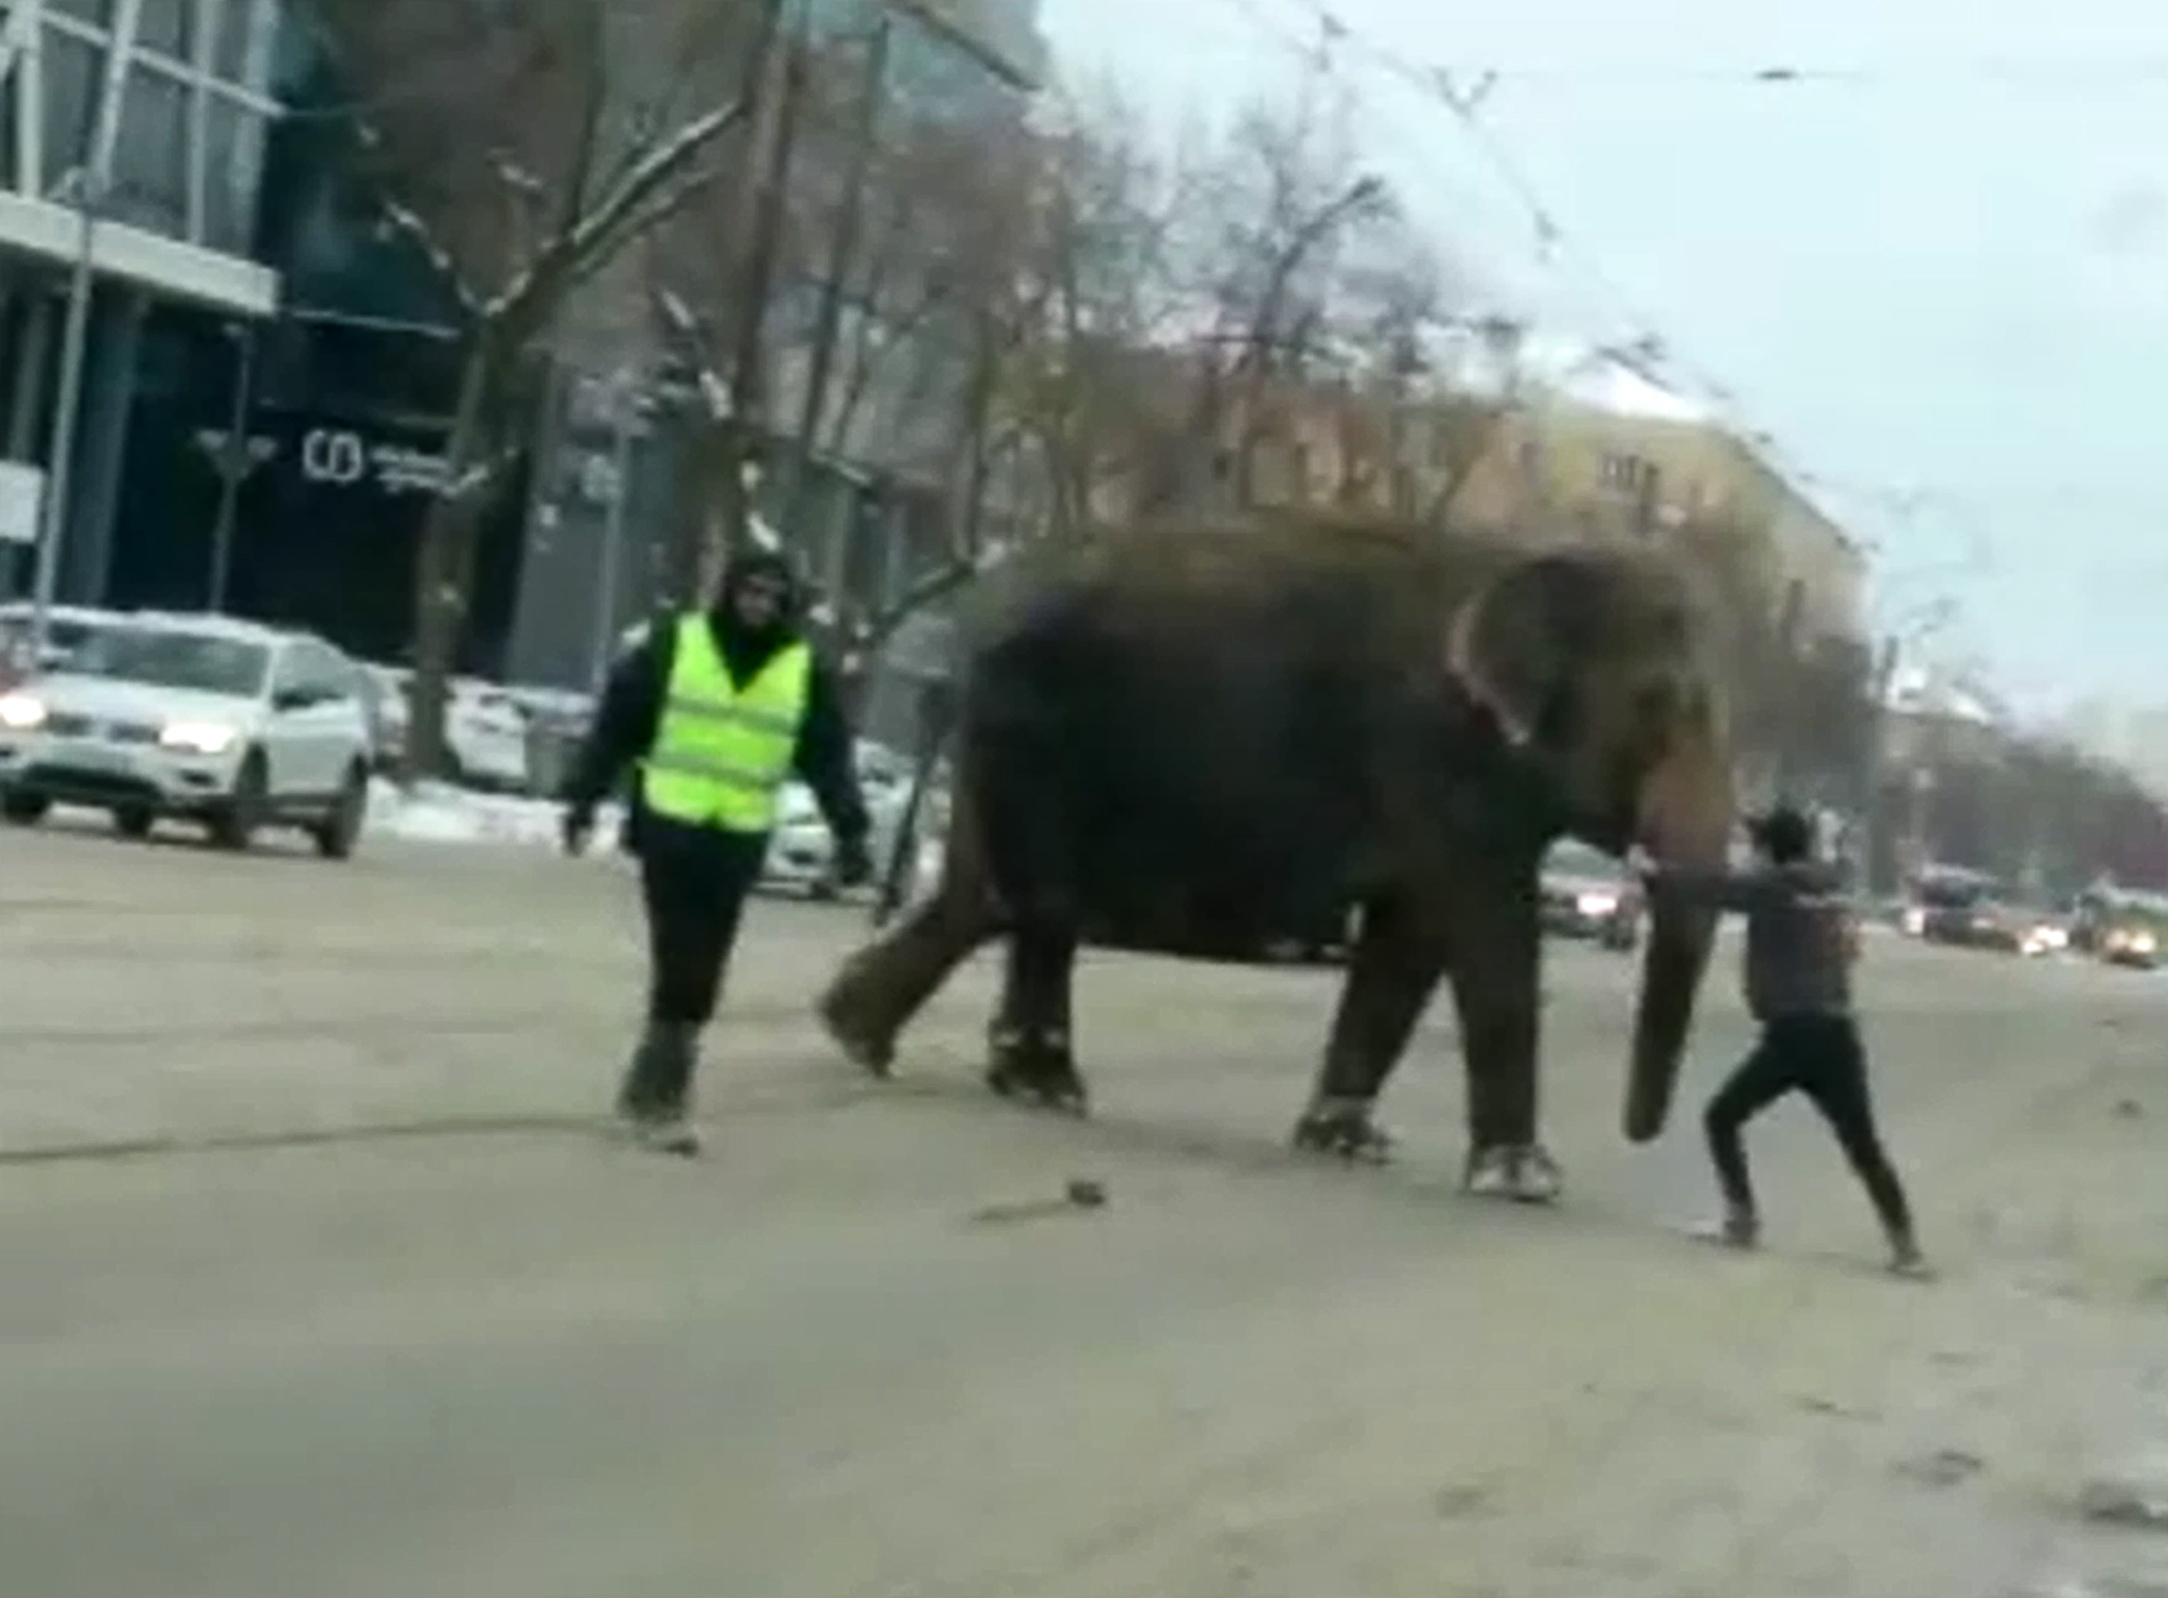 An elephant crosses the street in Yekaterinburg, Russia